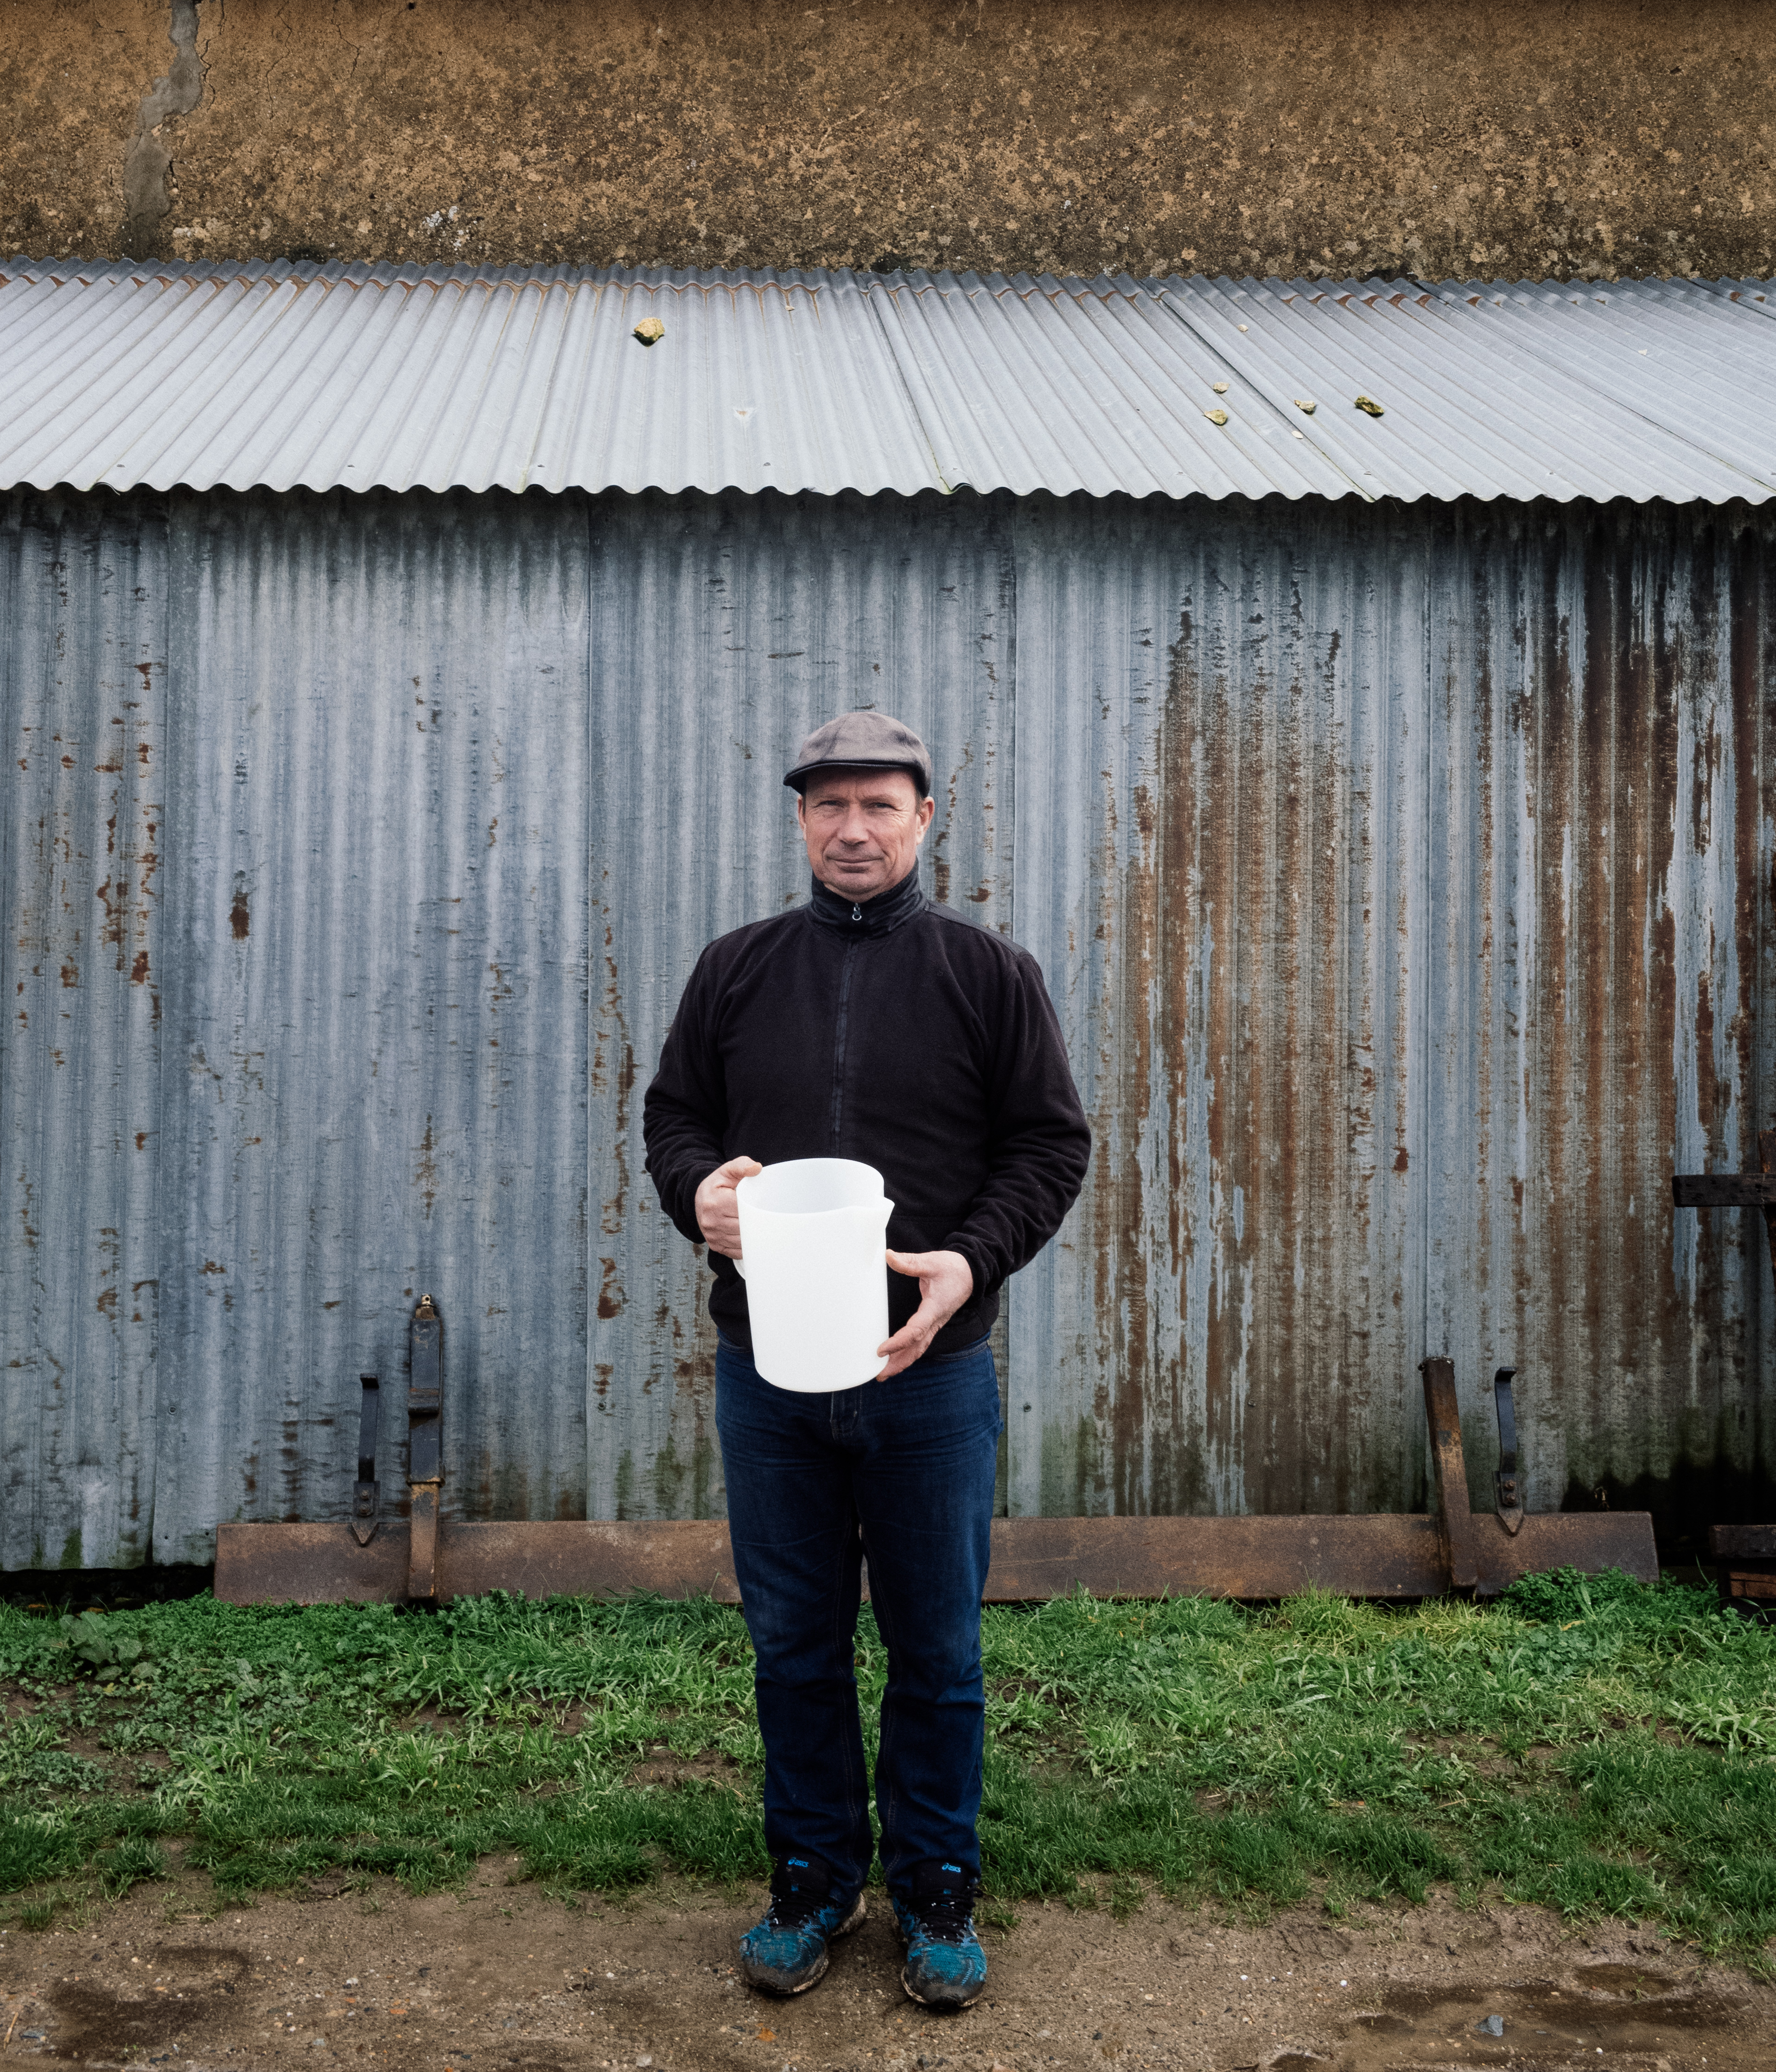 Patrice Riauté – man with no facial hair, wearing a cap, a black fleece jacket and jeans, holding a large plastic jug.